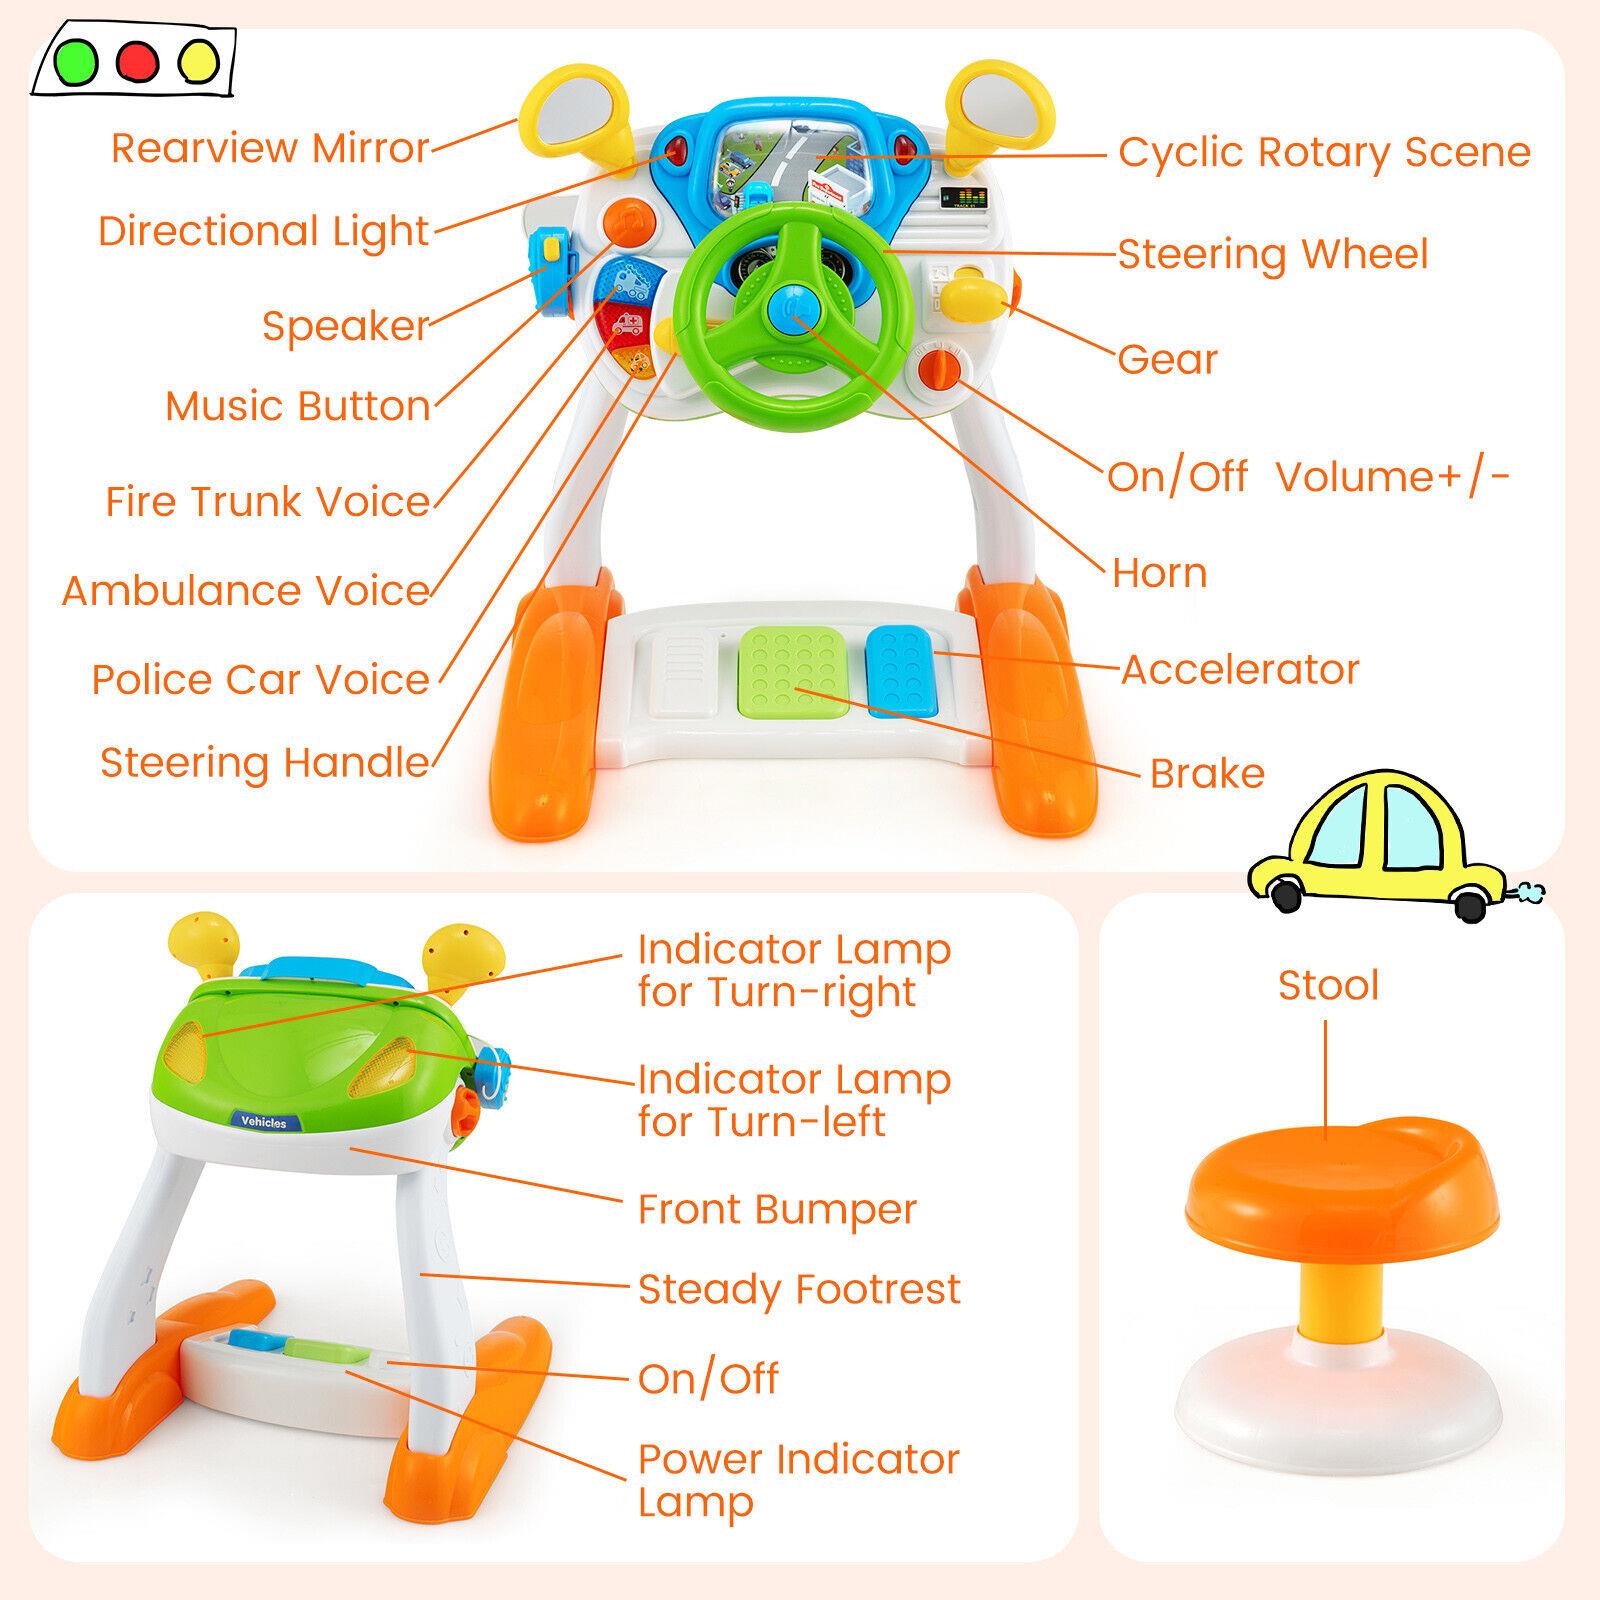 Freestanding Electronic Steering Wheel Driving Simulator Toy by The Magic Toy Shop - The Magic Toy Shop